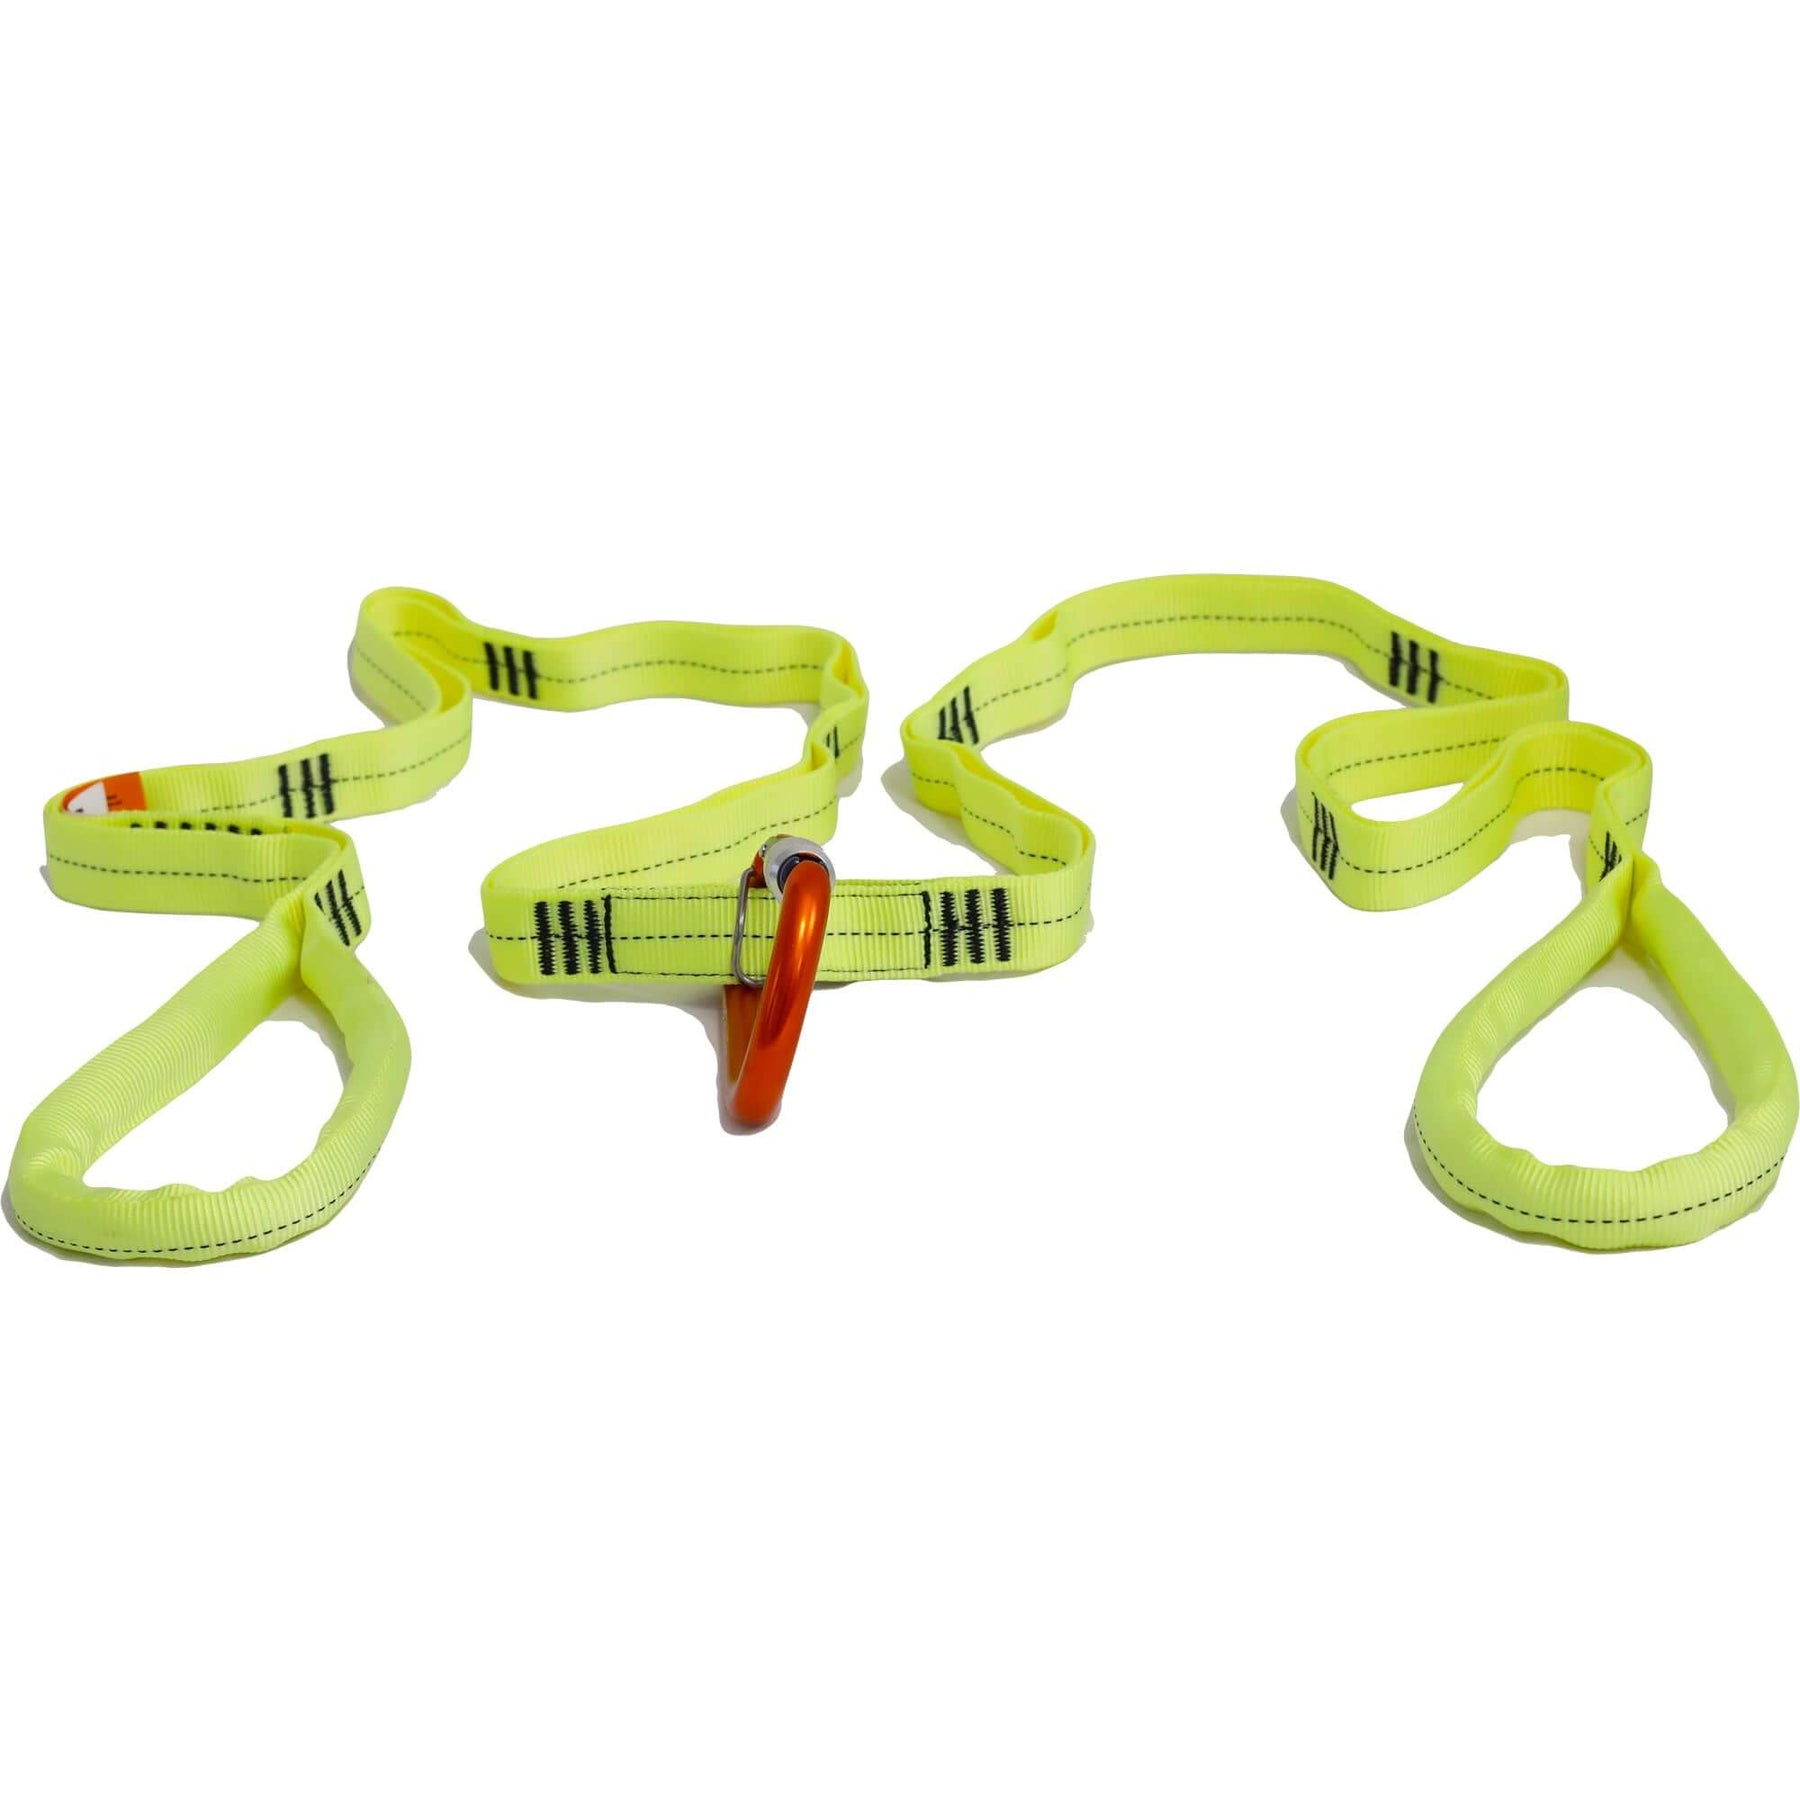 FirefighterStraps | Extrication Tool Carrying Strap | Short